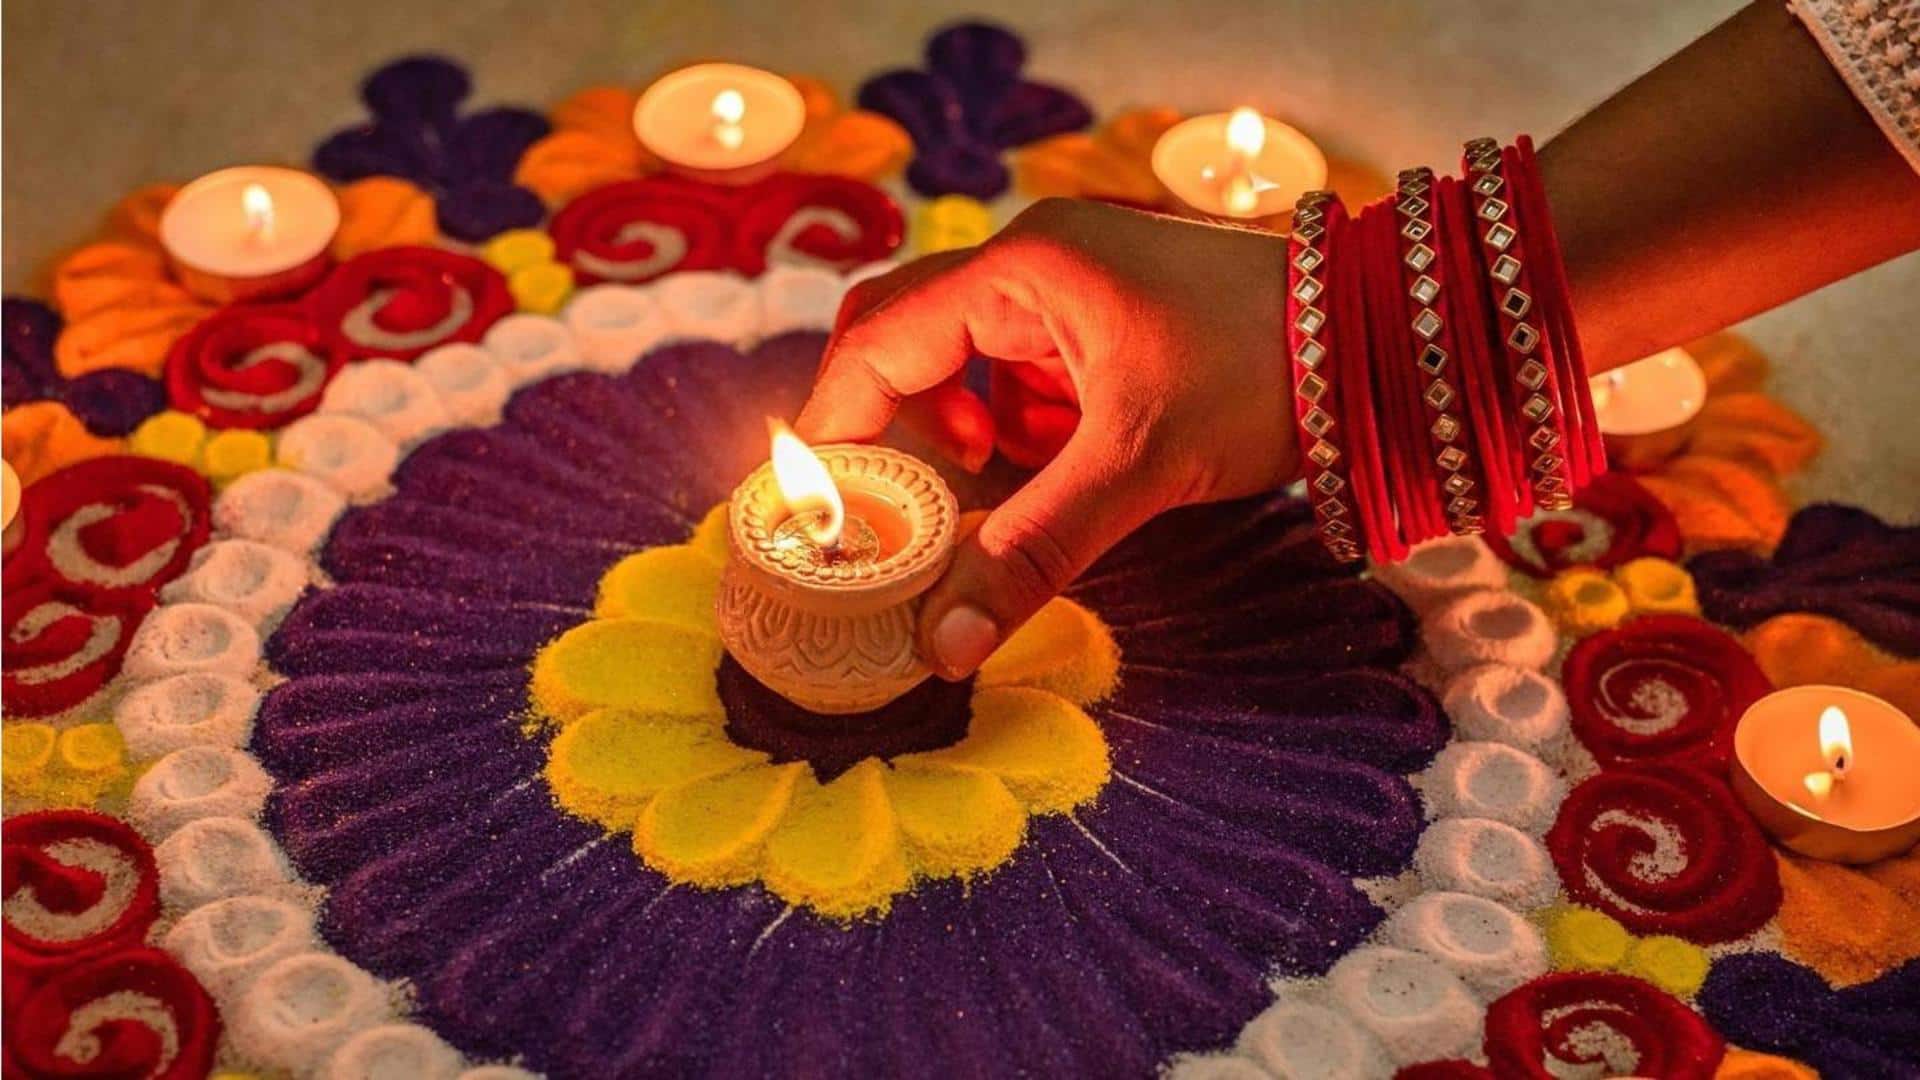 US: Pennsylvania recognizes Diwali as official holiday